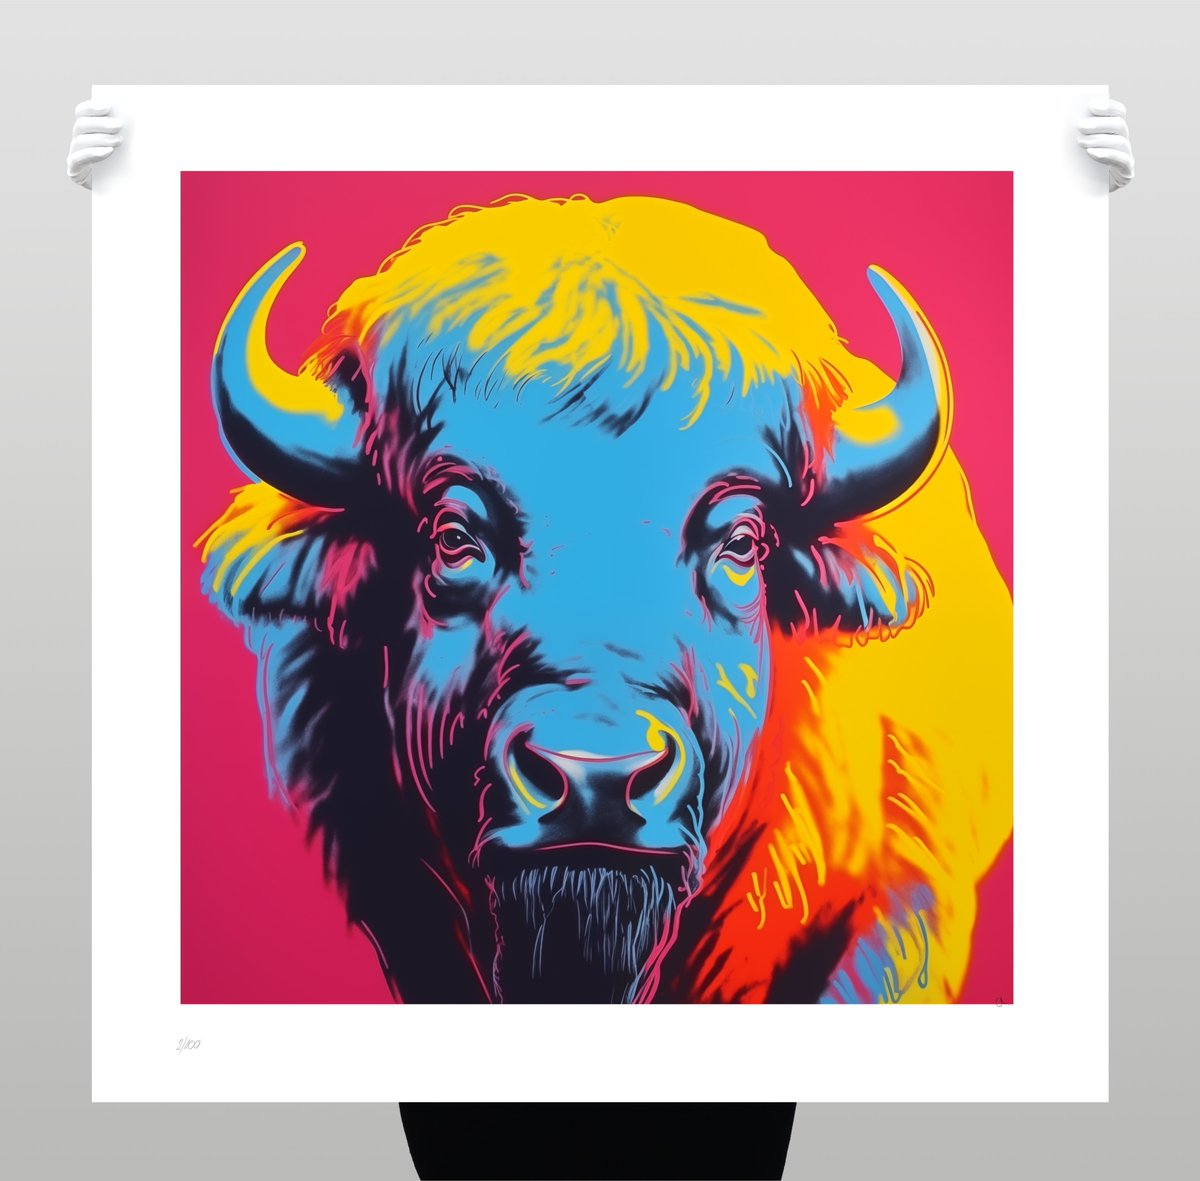 Bull
Goran Juric, 2024 
#exciting #art 🤩 #fineart #Bull #iconic   #contemporarypainting #contemporaryart #popart #figurativeart #USA #art #gallery #neoncolours #Symbol  #Lonon #Texas #cool